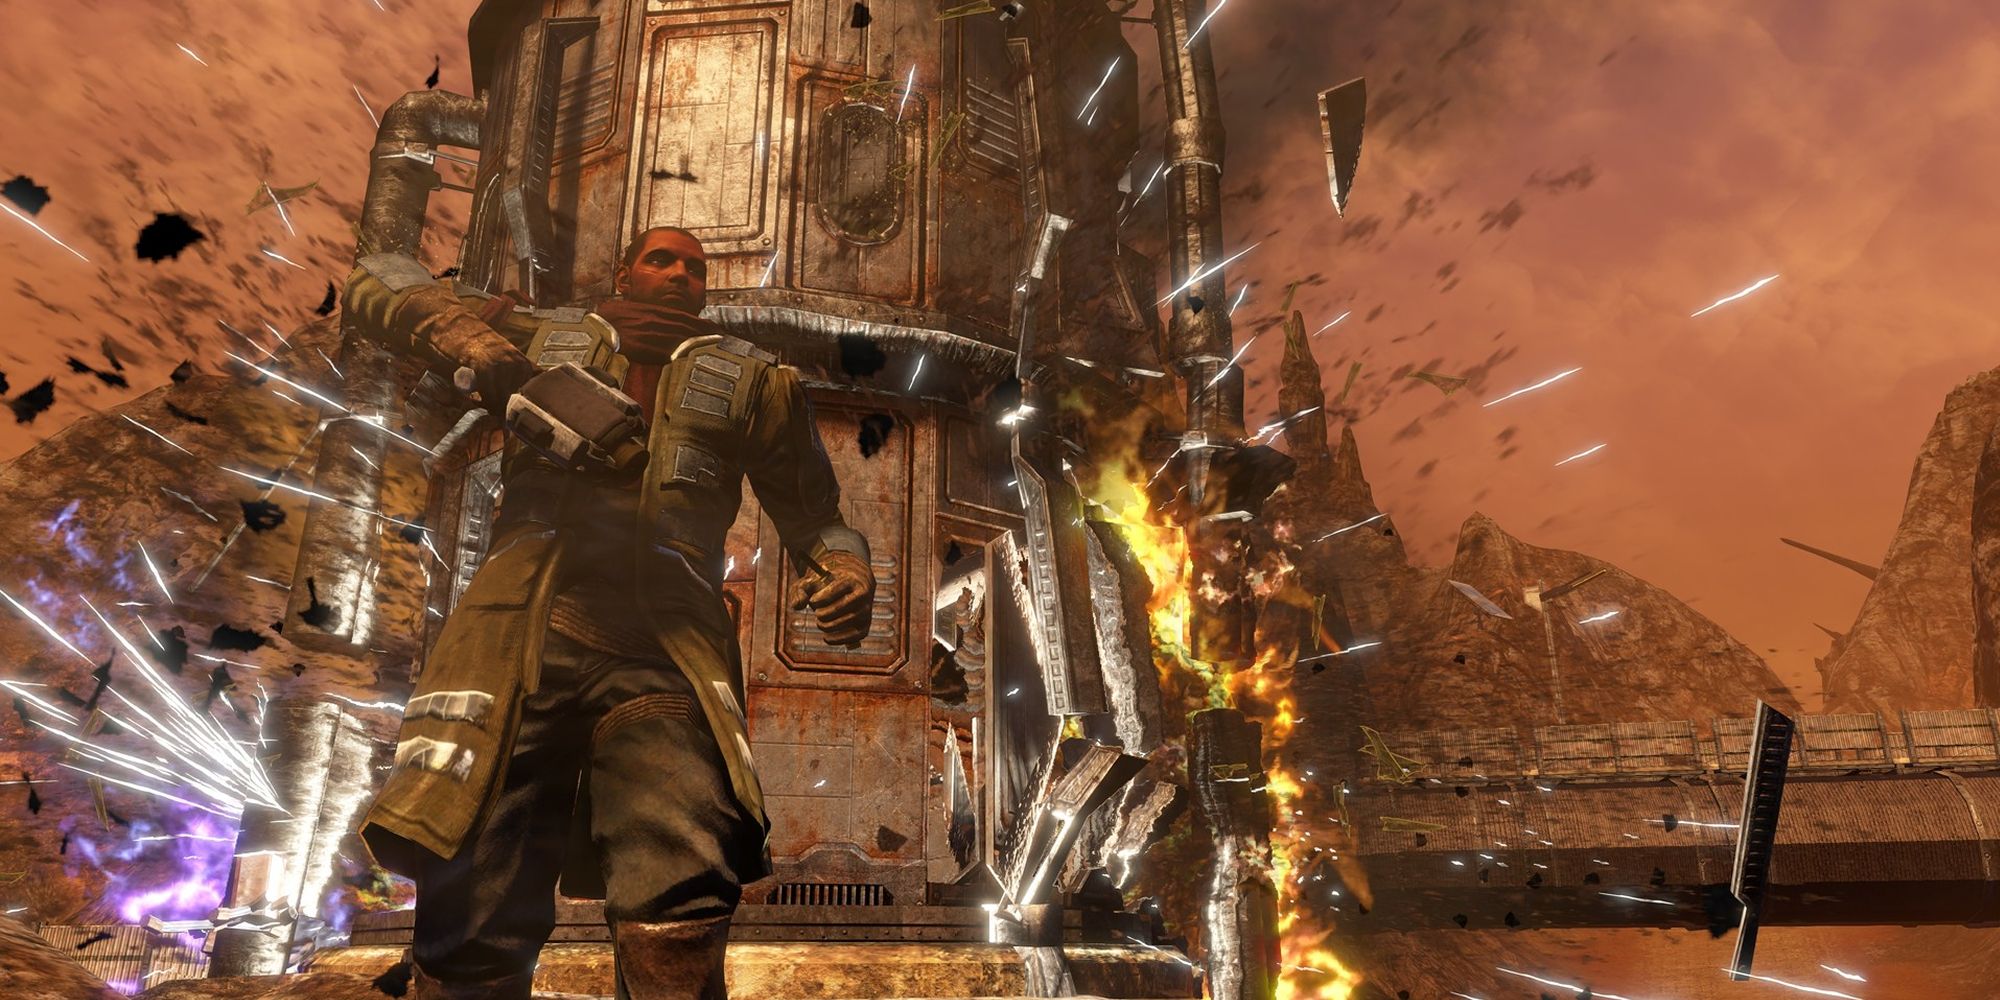 The main character in Red Faction Guerilla walks away from an exploding building